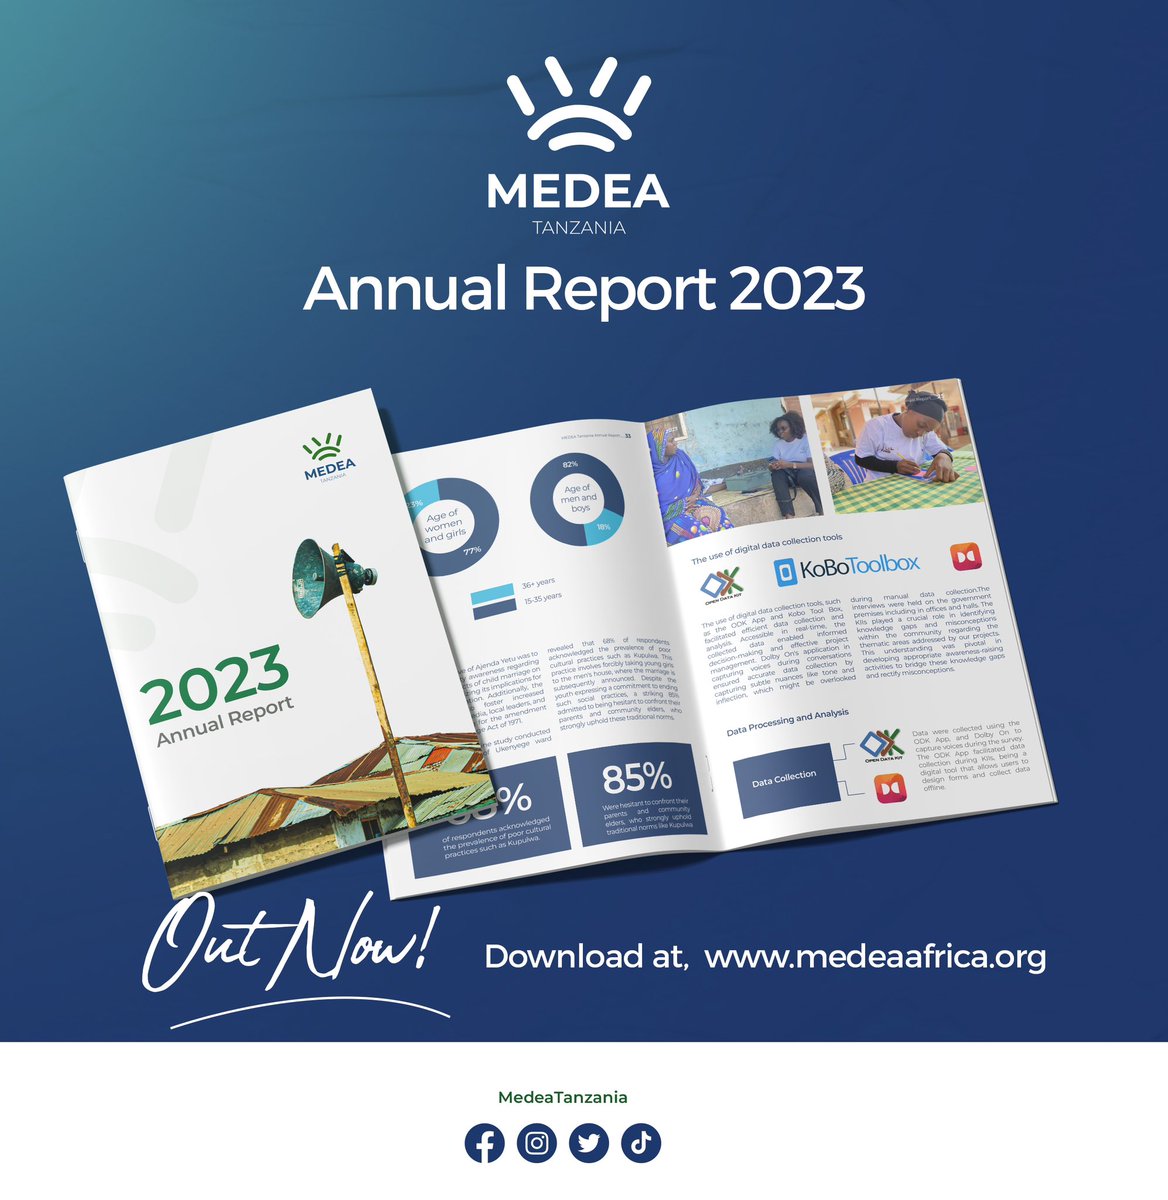 It's with great pleasure & excitement that we share with you the our 2023 Annual Report. This report encapsulates our collective efforts, achievements, & contributions towards fostering positive change and empowering communities. The full report is available on our website.